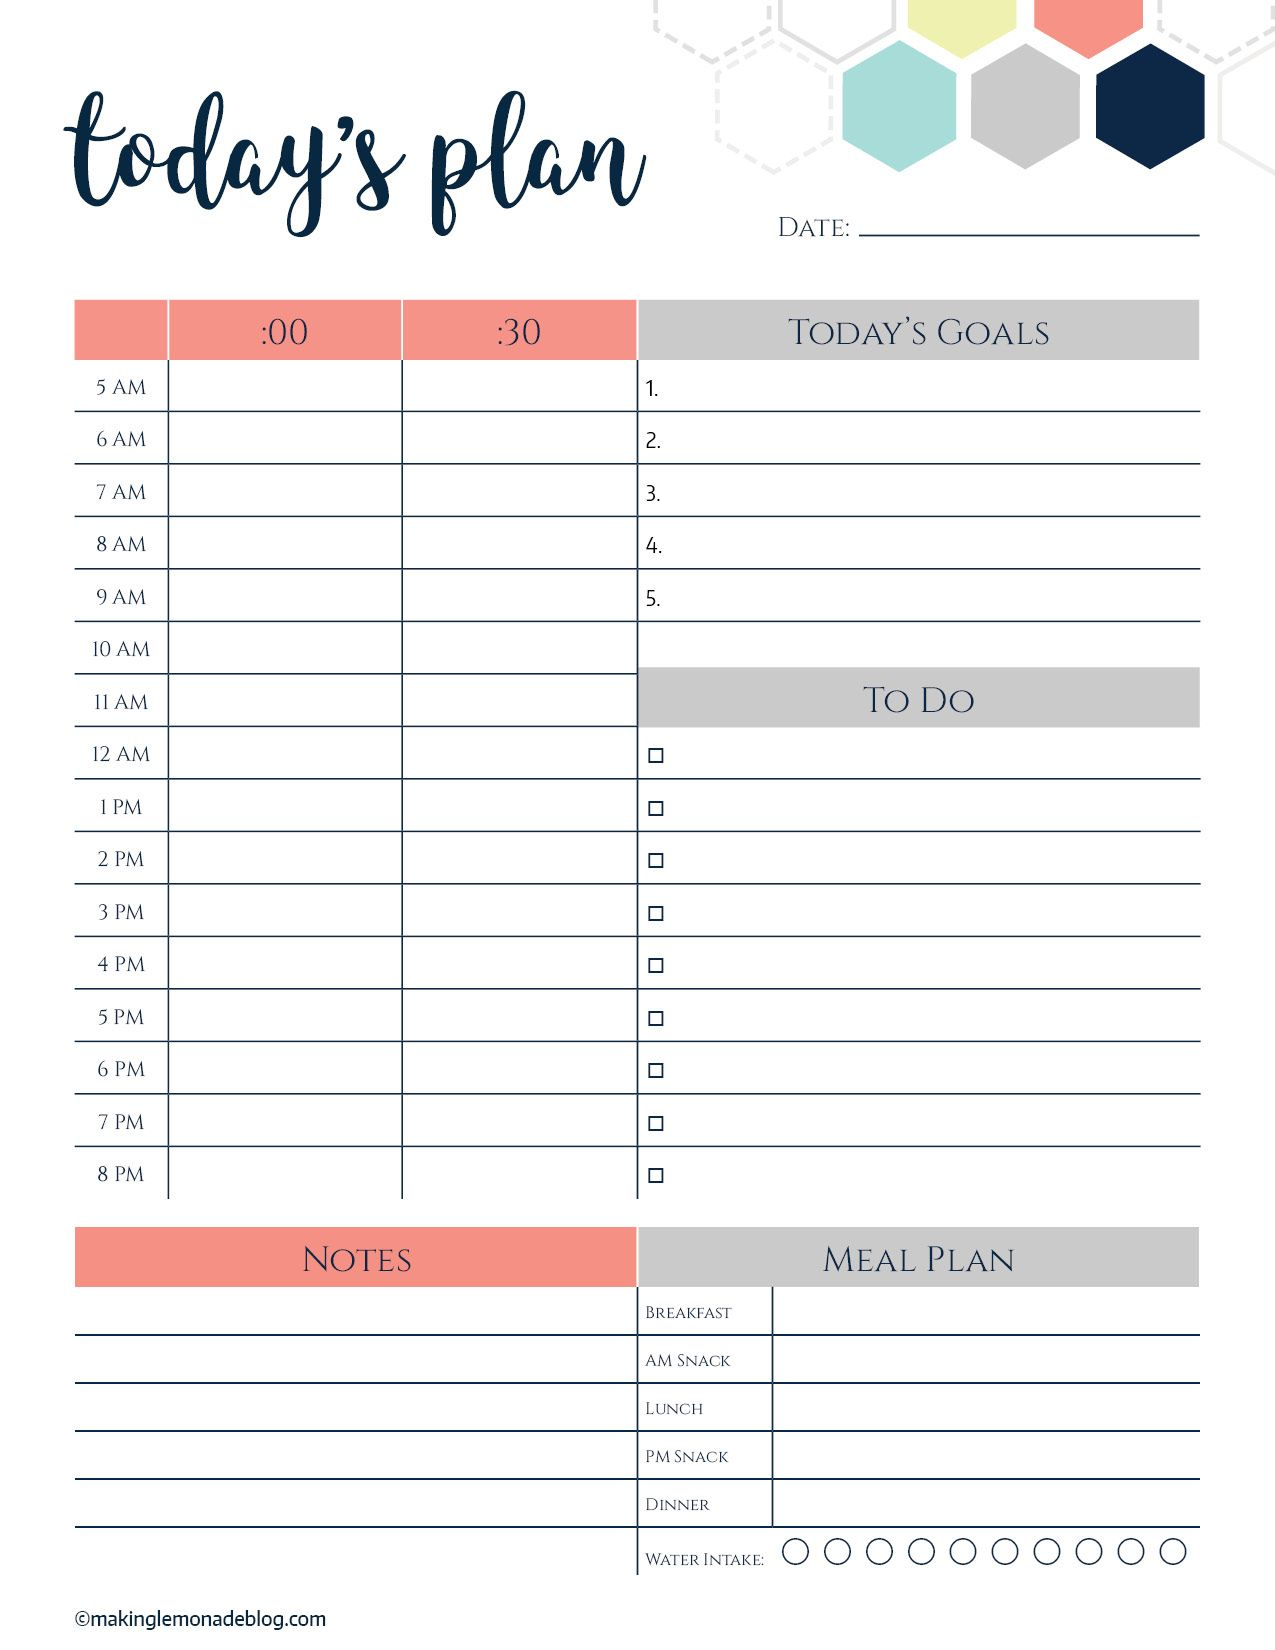 This Free Printable Daily Planner Changes Everything. Finally A Way - Free Printable Daily Planner 15 Minute Intervals